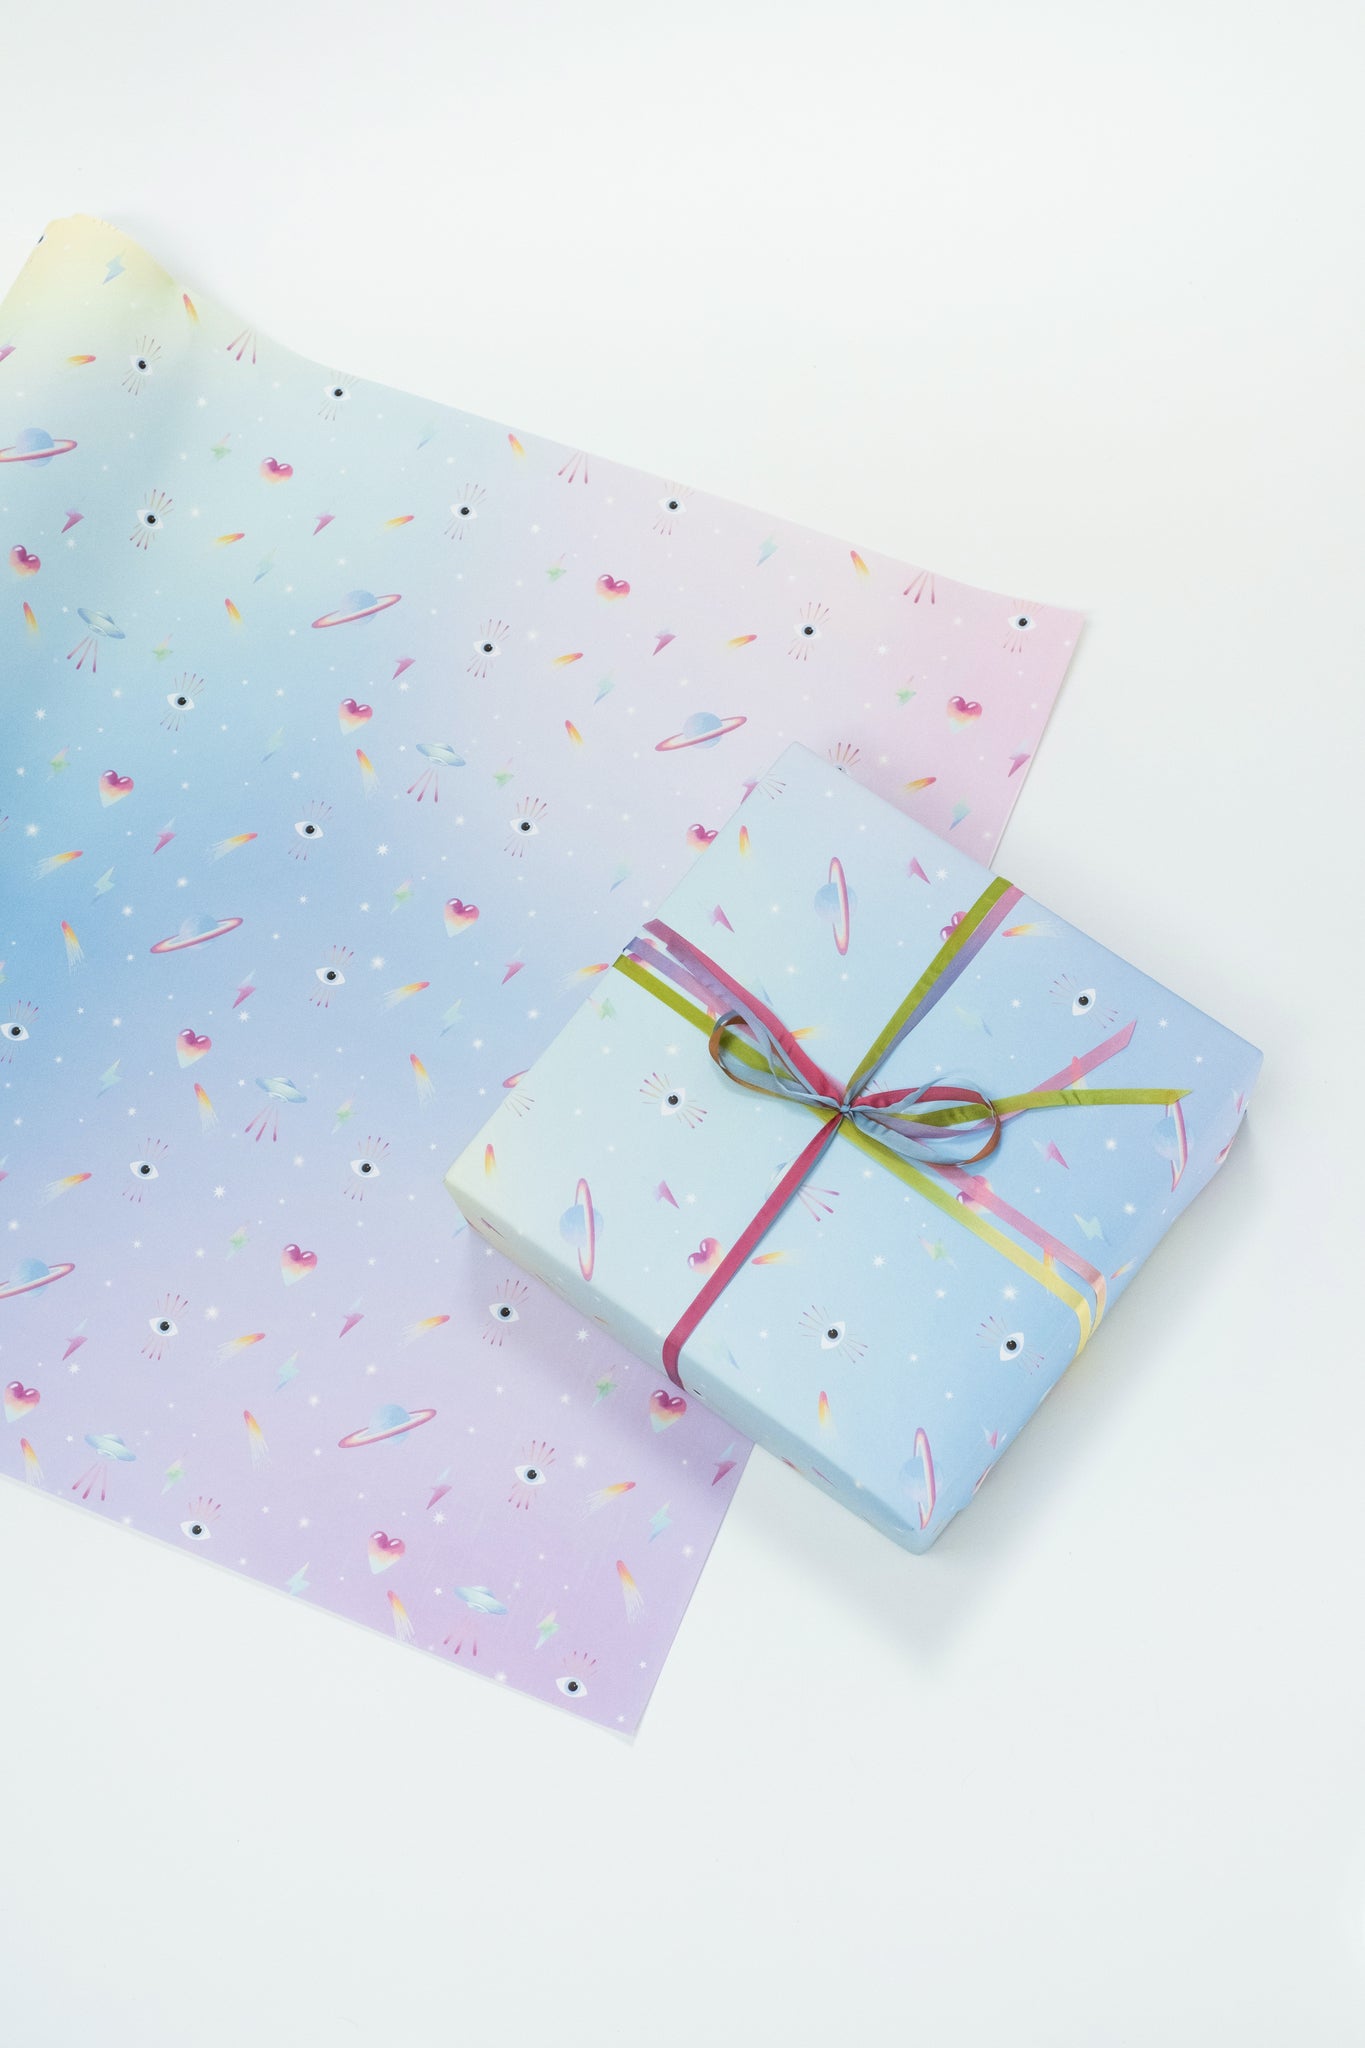 Single sheet of gift wrap with pastel gradient background and neon icons. Shown wrapped on present with pink and green velvet ribbon.